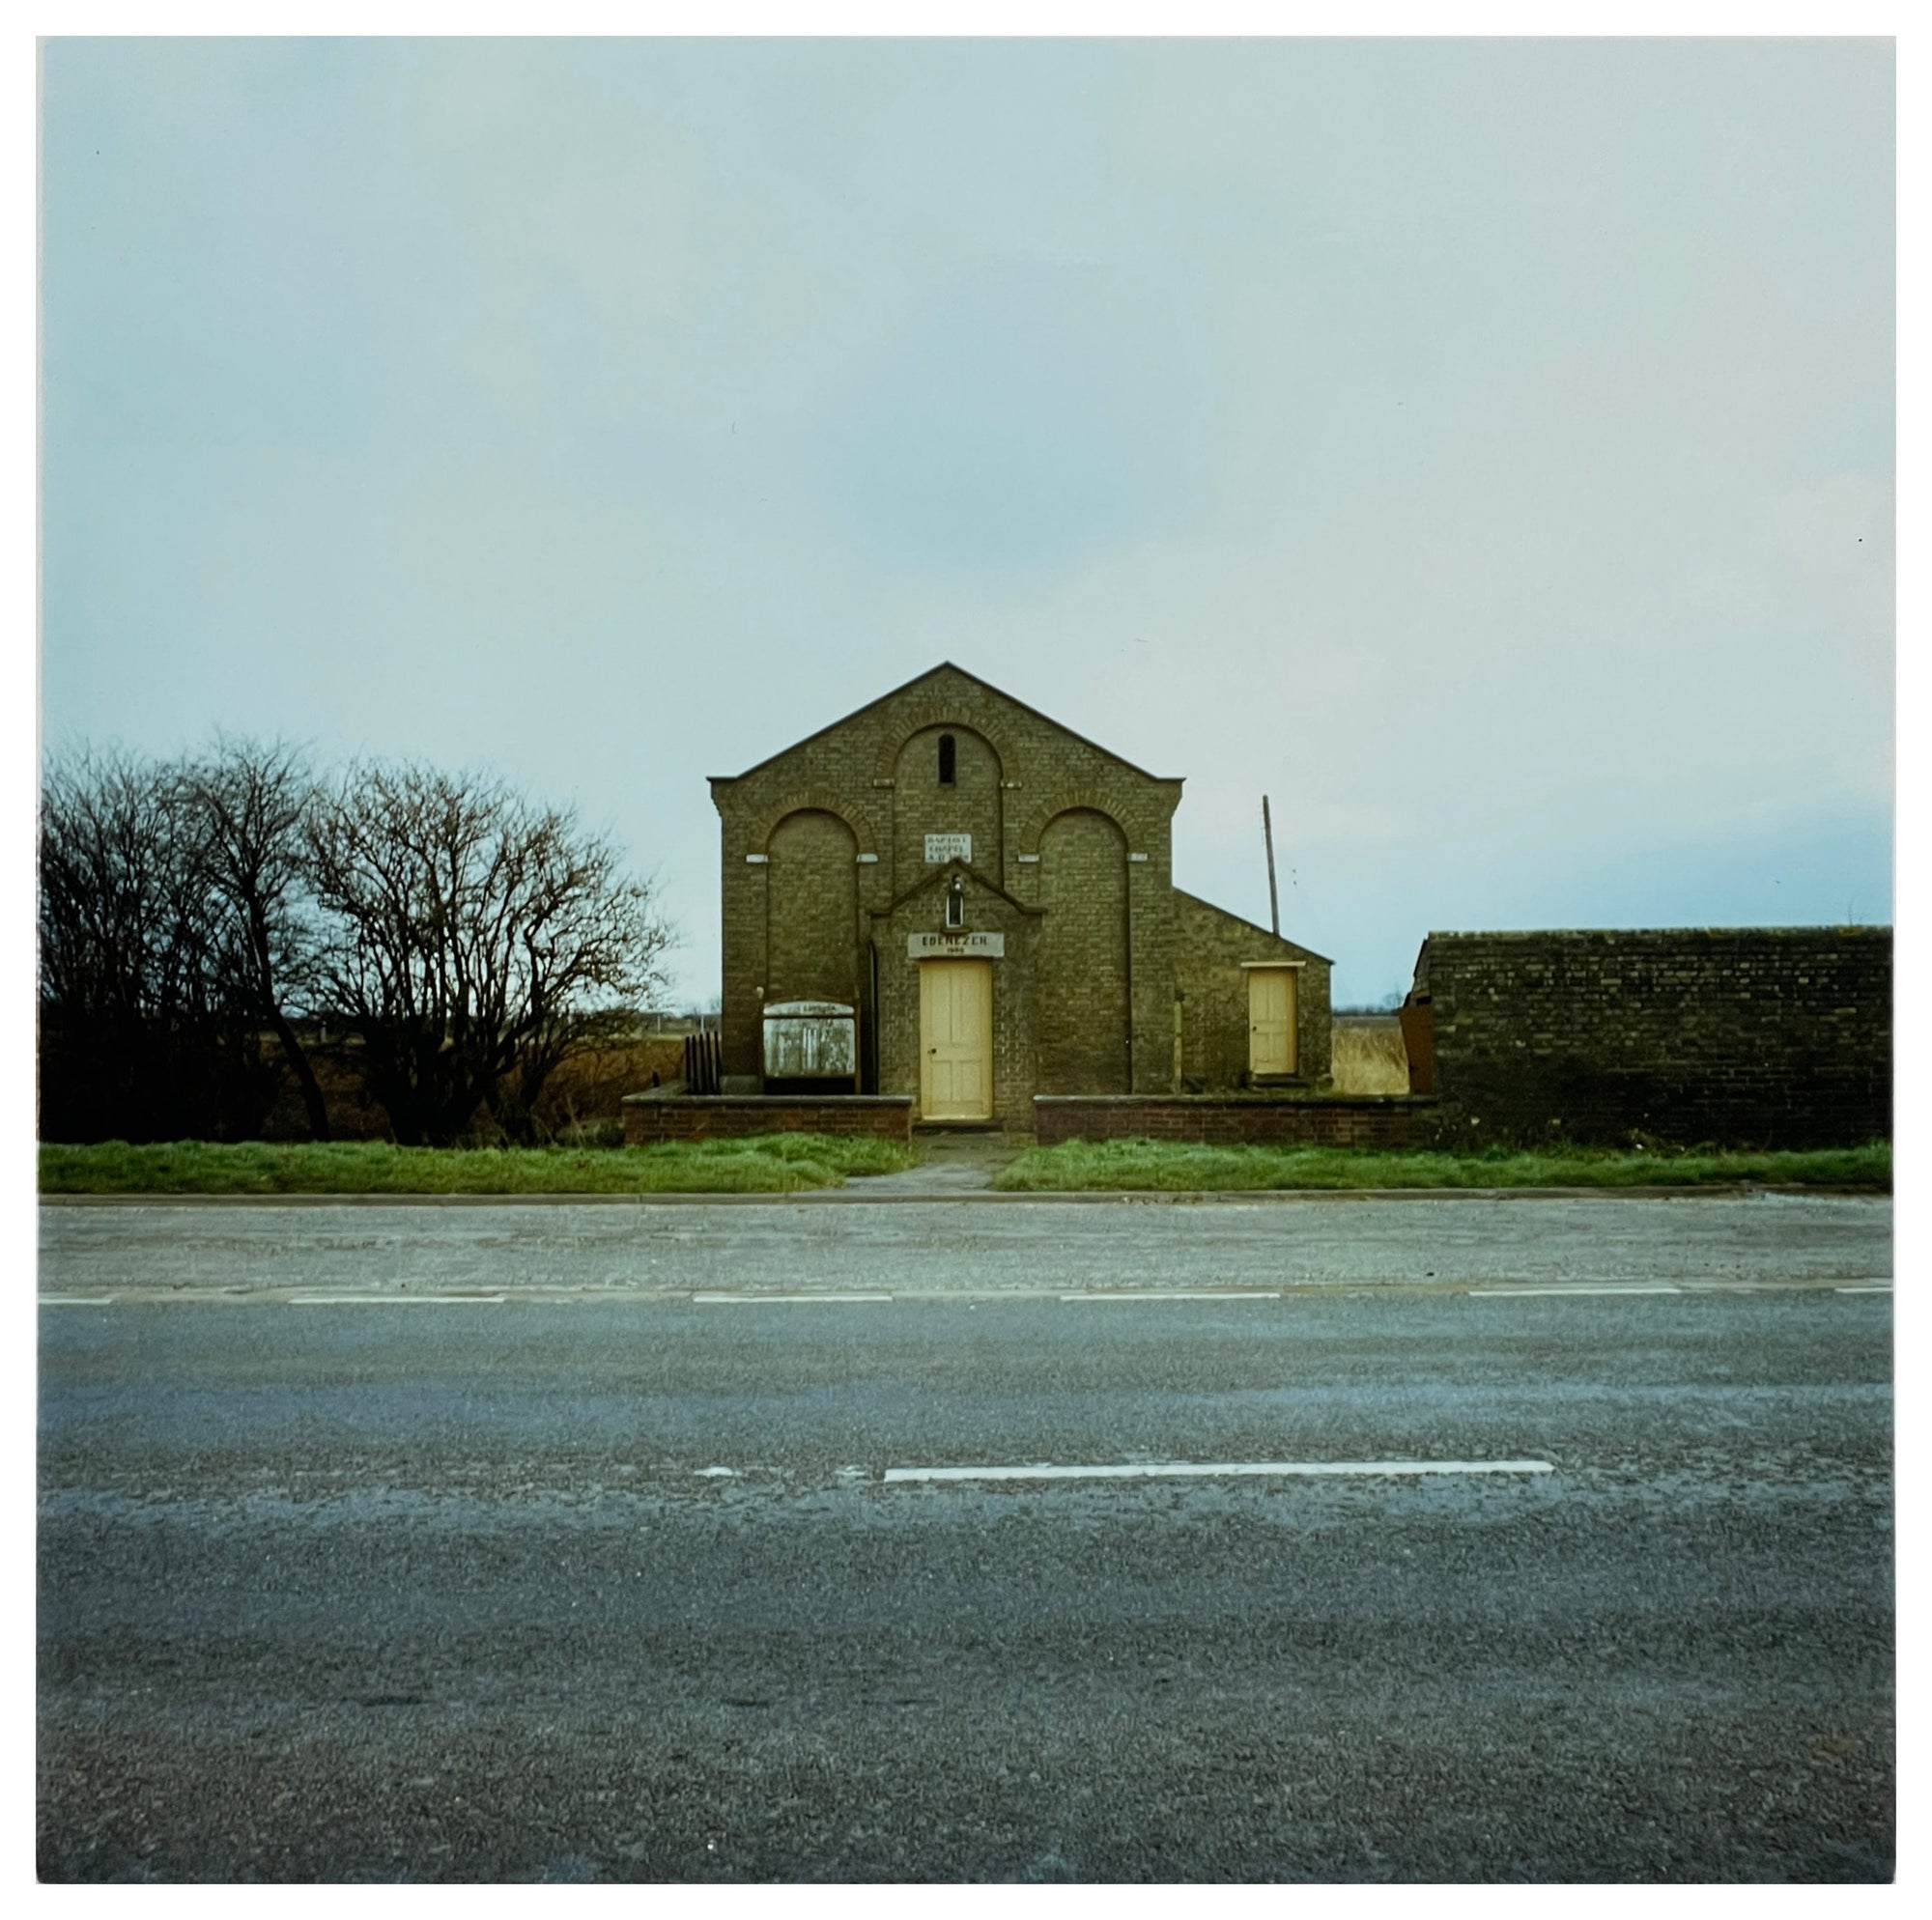 Photograph by Richard Heeps.  In the foreground is an empty road, on the opposite side of the road is a grass verge and then a yellow-doored, windowless, Chapel sitting solitary with no other buildings nearby.